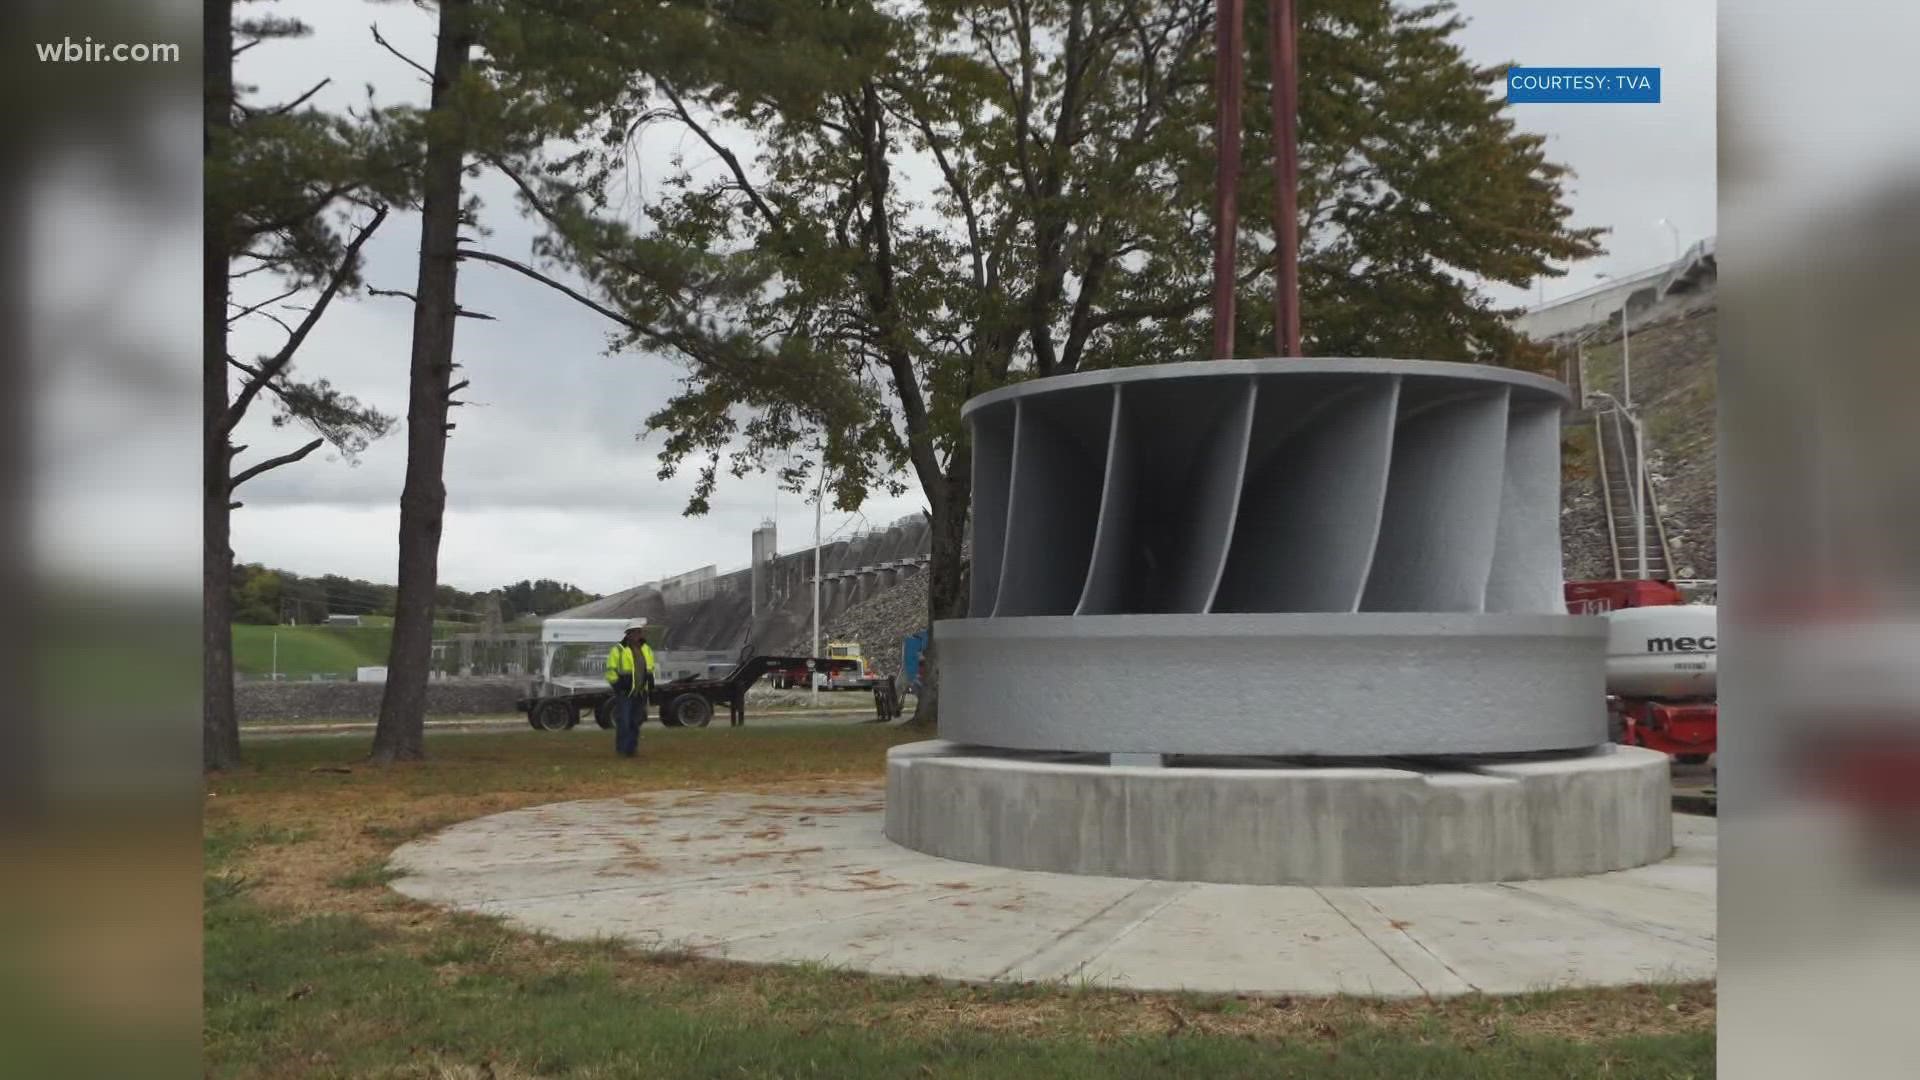 TVA said the 52-ton turbine had been in service at Cherokee Dam for nearly 80 years, which was created to help generate hydroelectric power during World War II.